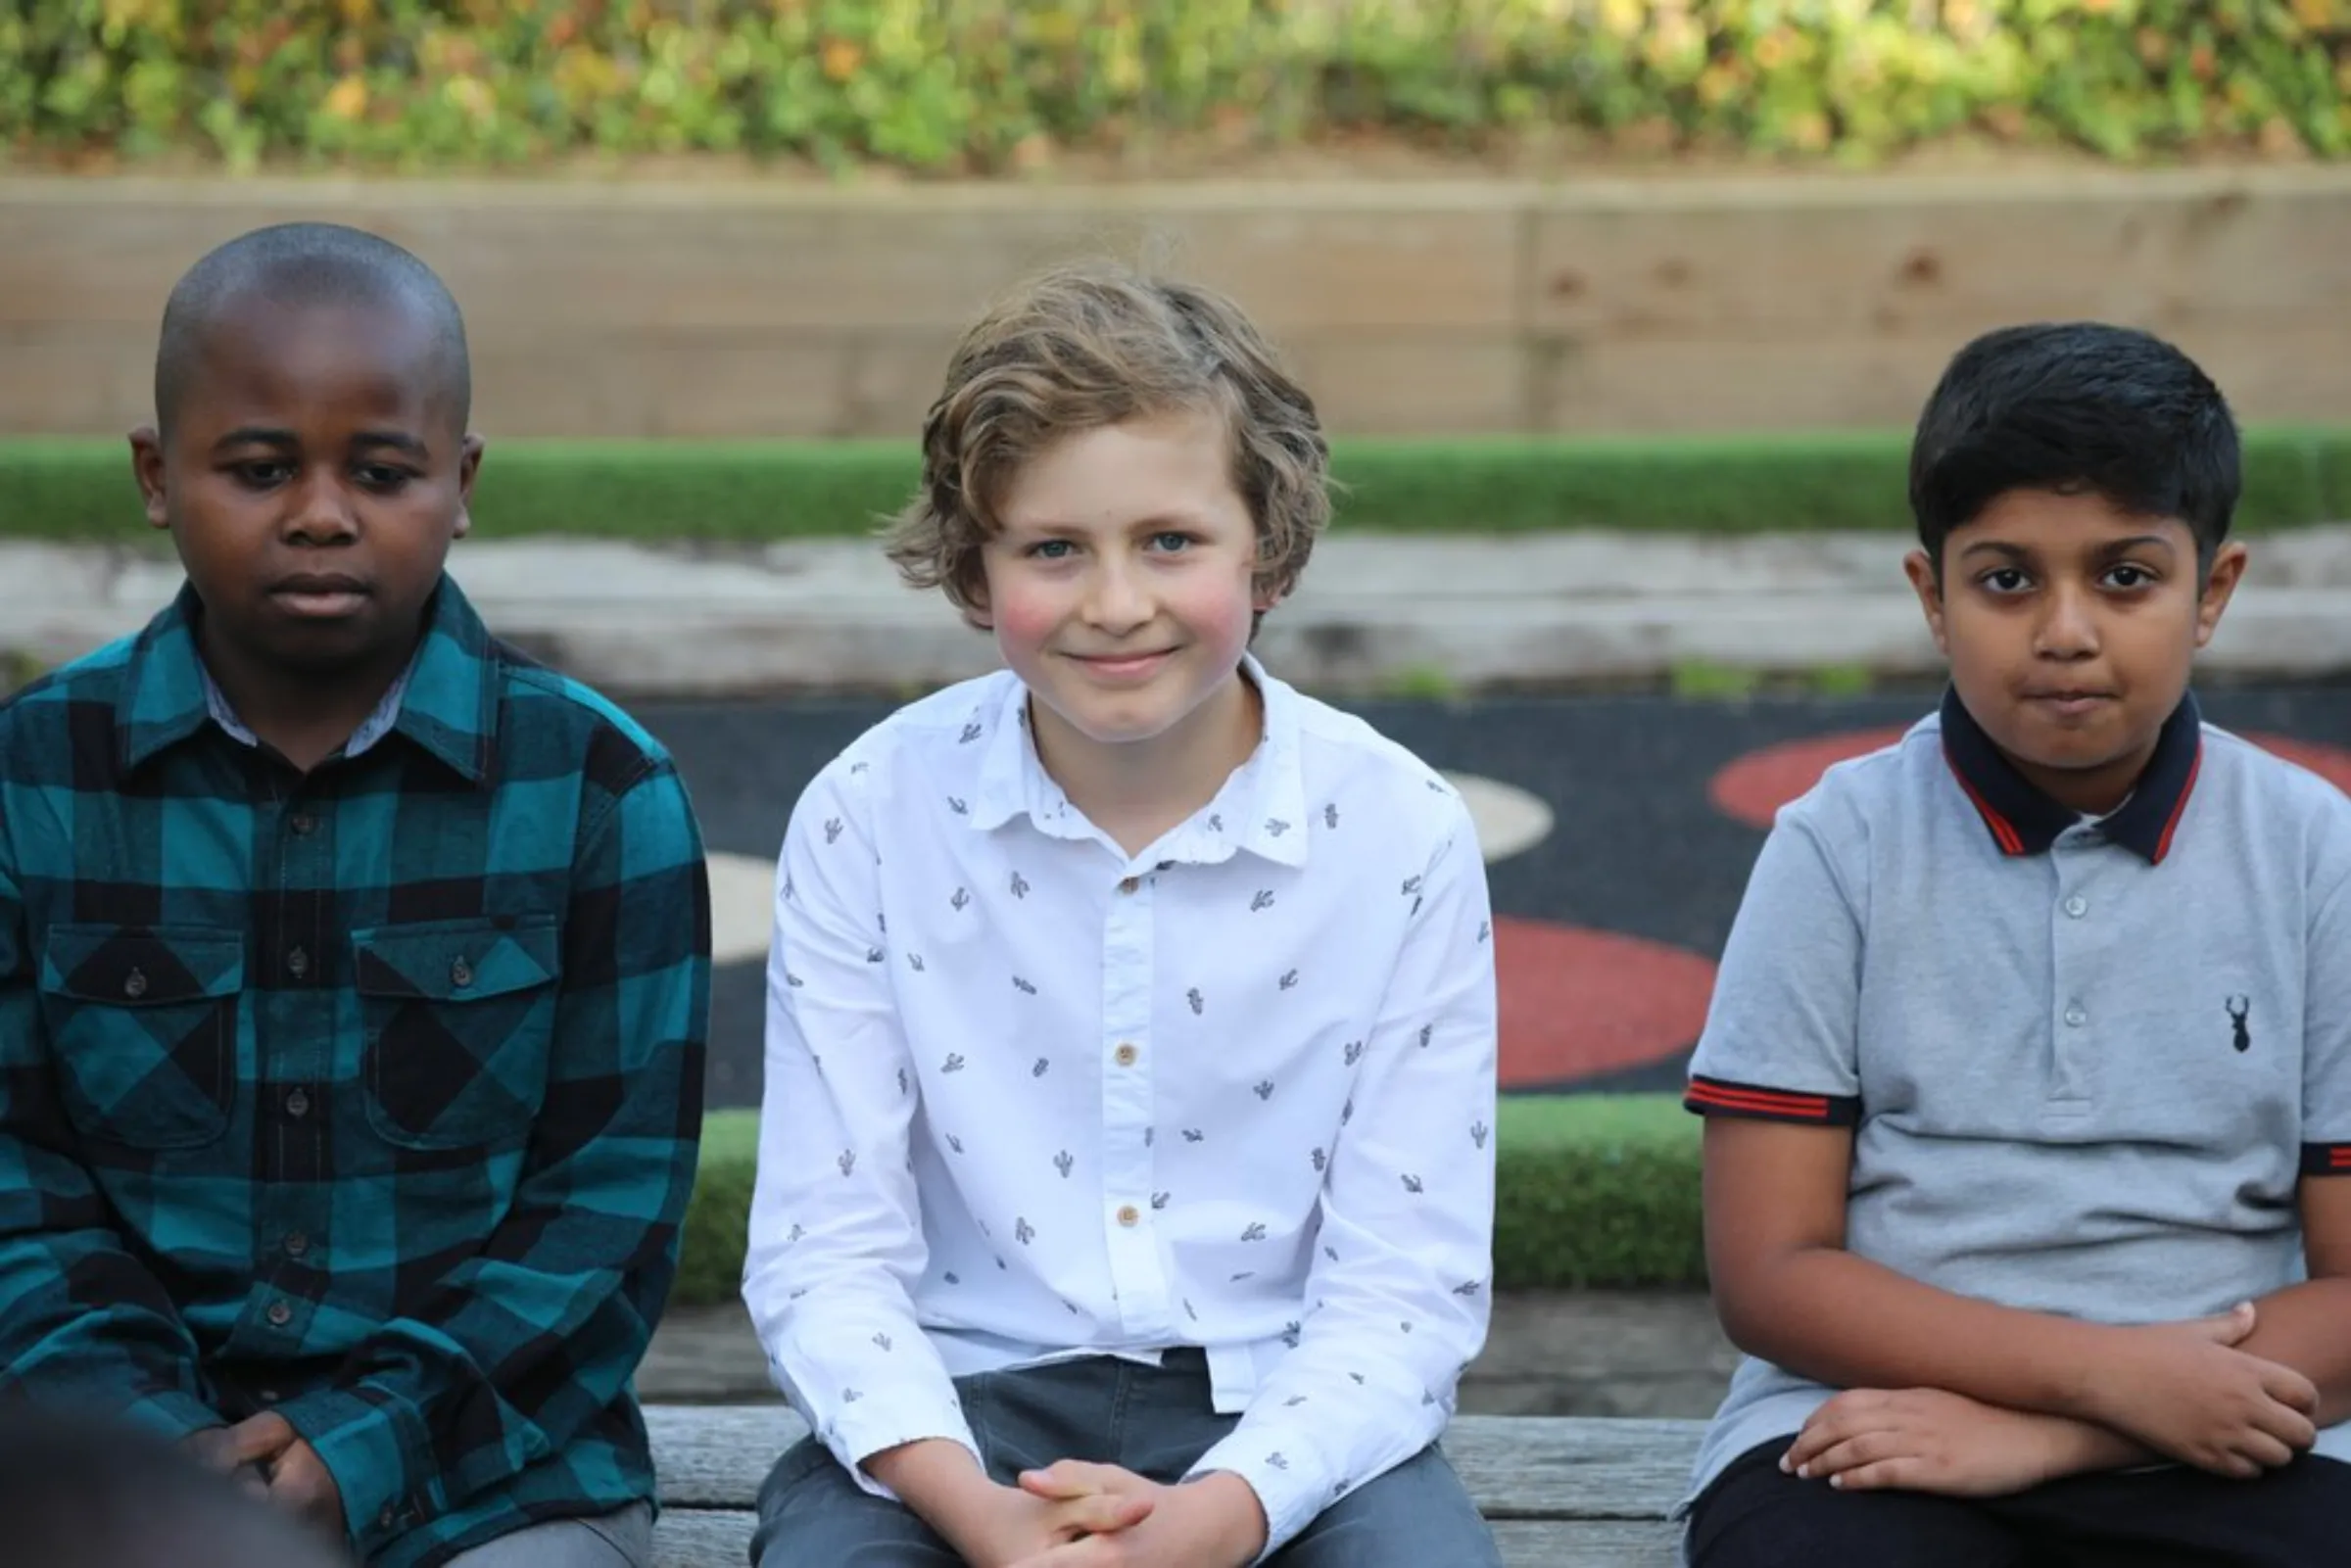 Alusine Fane, 11 (left), sits with other students from Prior Weston Primary School in central London, England, on September 23, 2021. “I worry about future generations even though it’s not something I should have to worry about,” he says